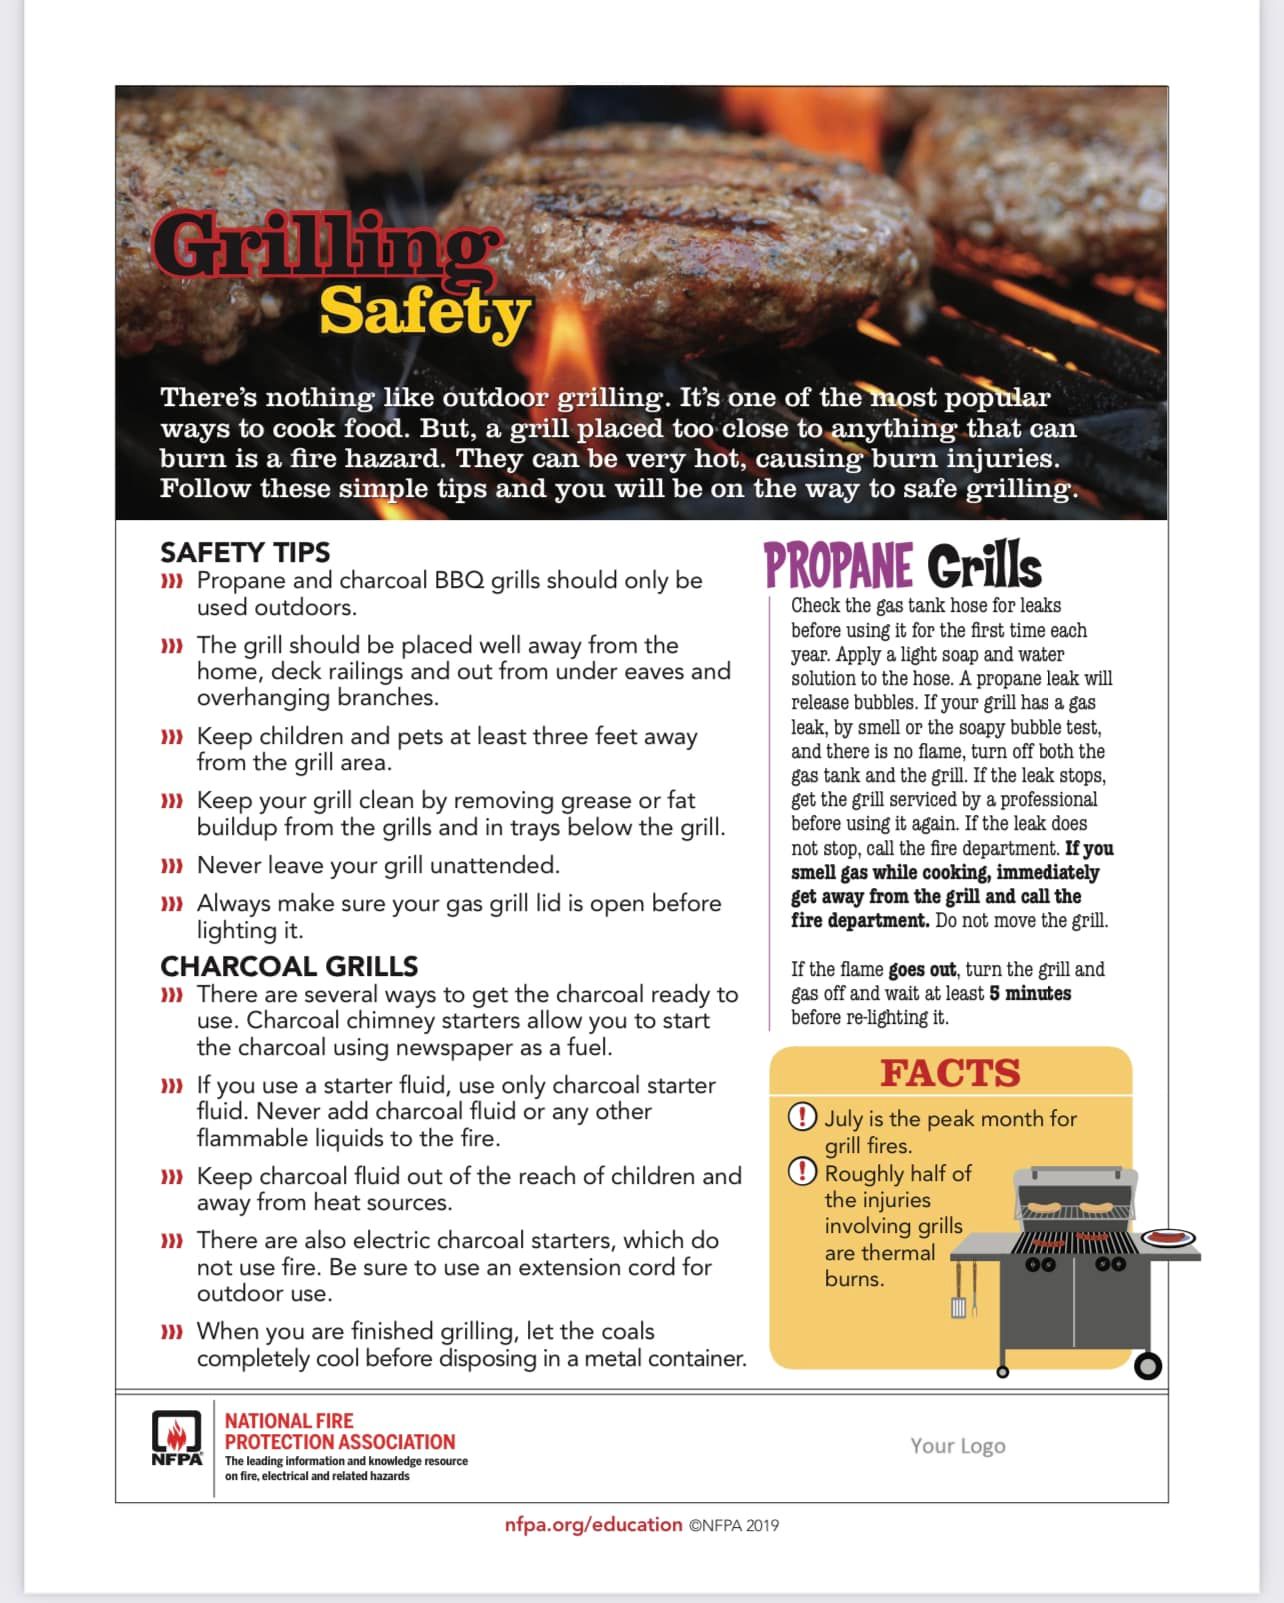 How to Clean a Grill: Tips for Charcoal, Gas, and All Other Grills